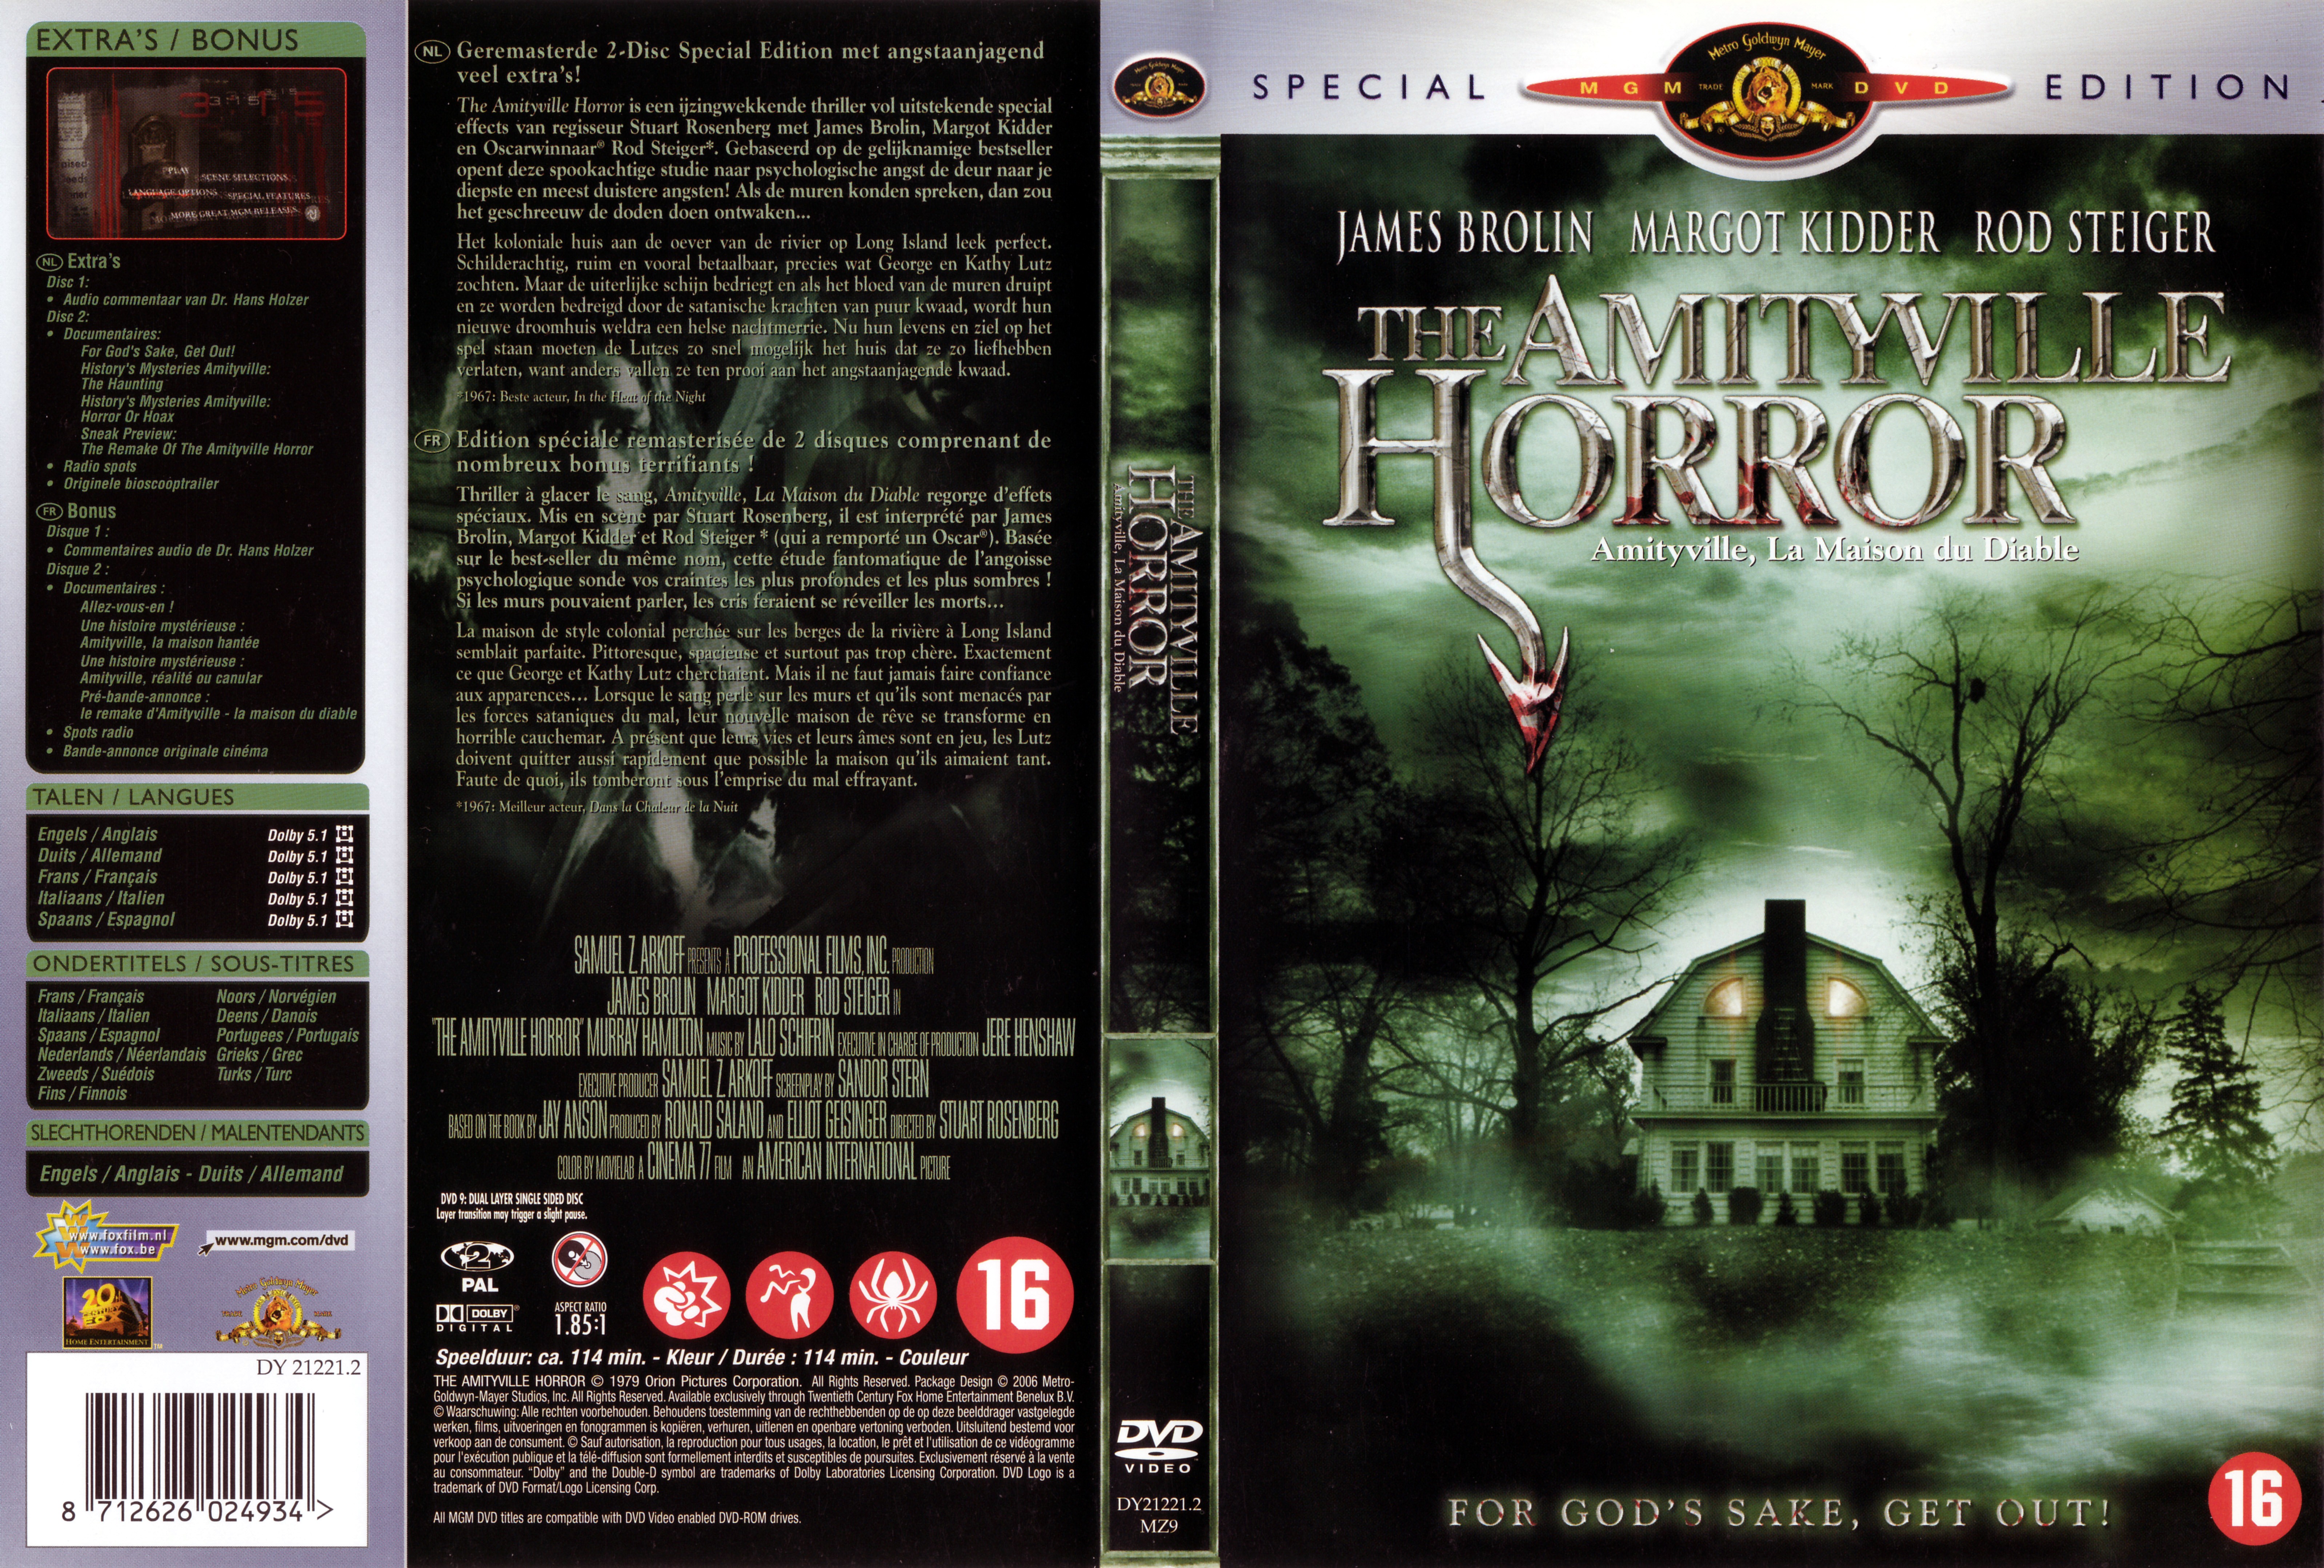 Jaquette DVD The Amityville horror (1979)